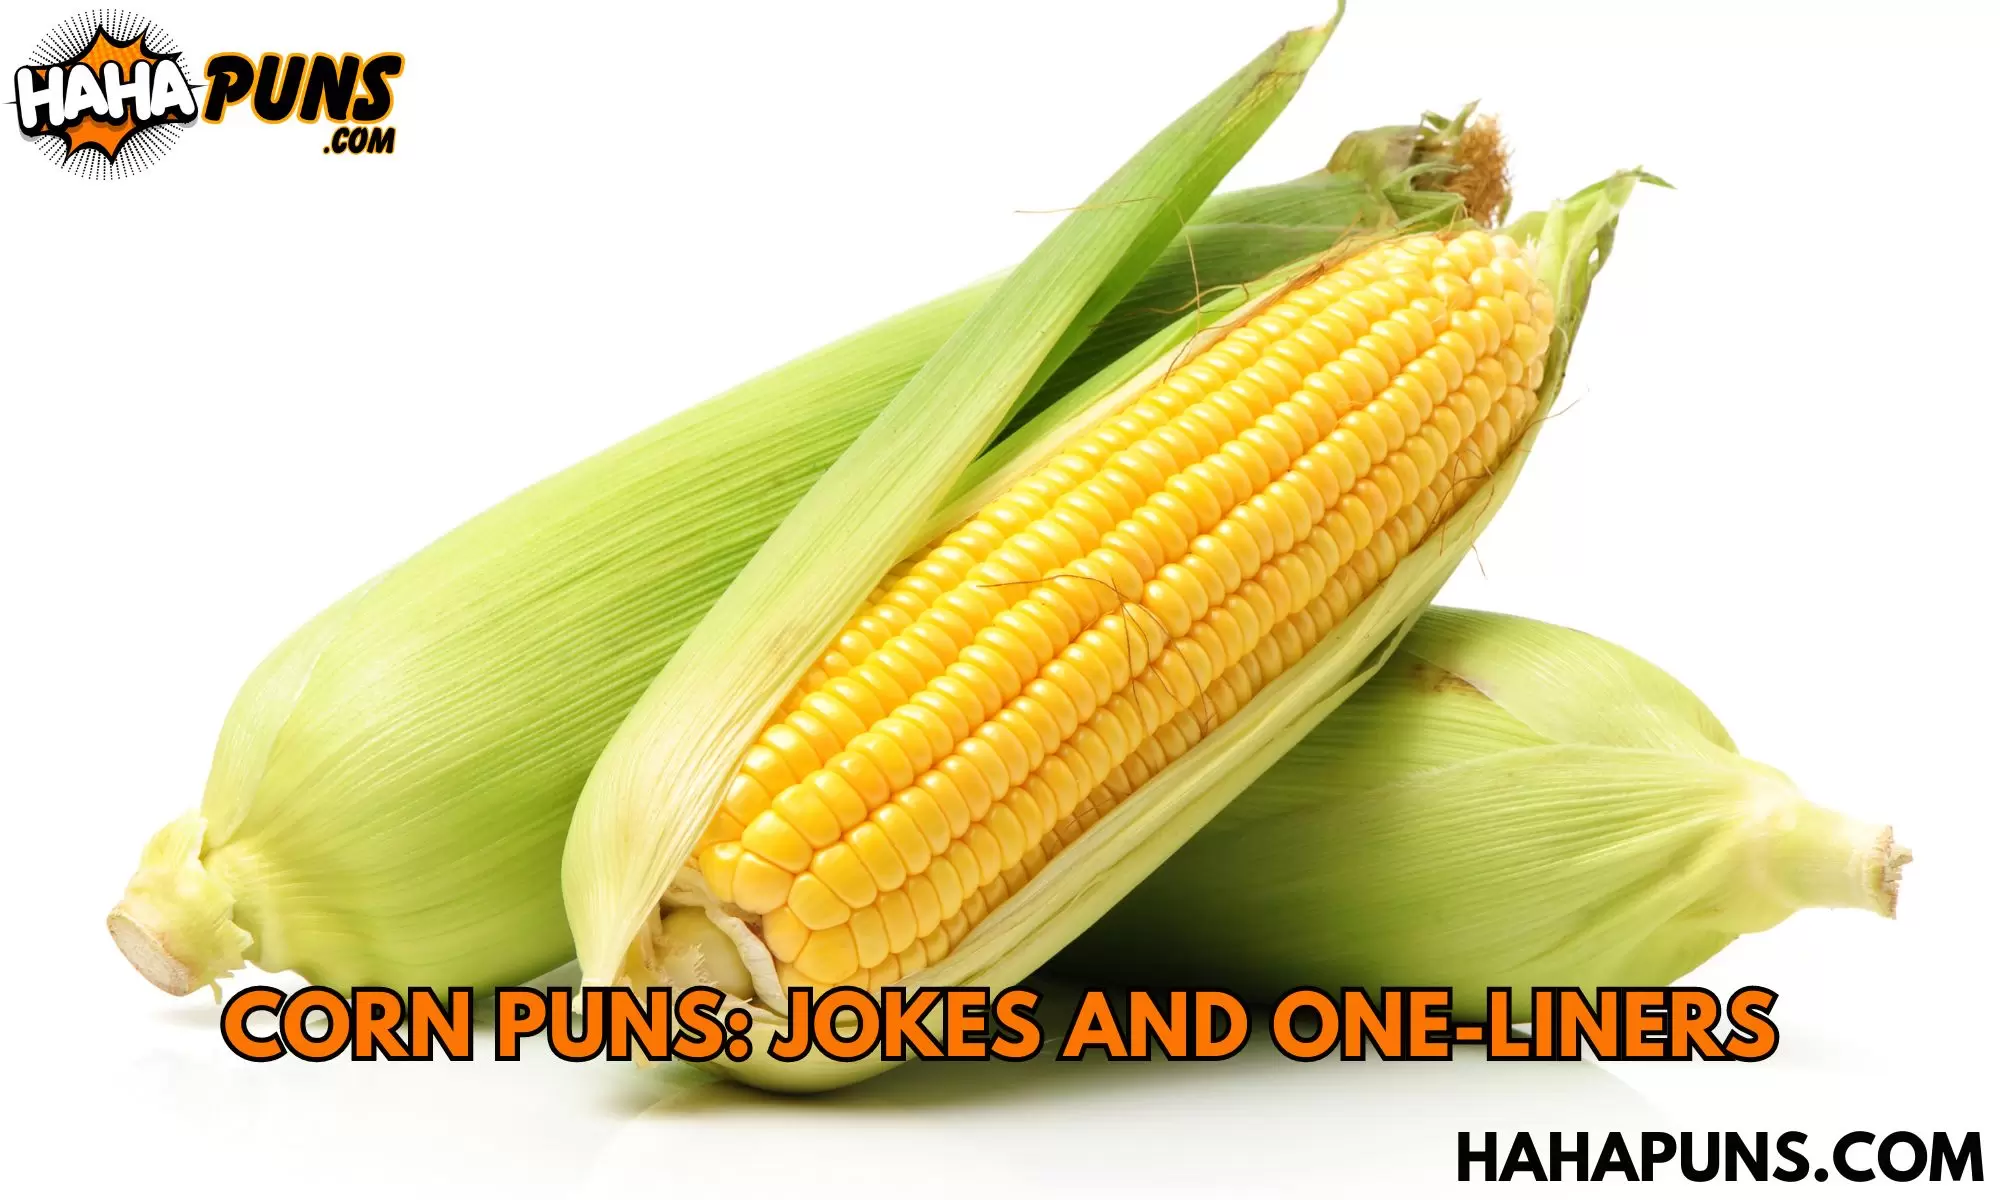 Corn Puns: Jokes And One-Liners